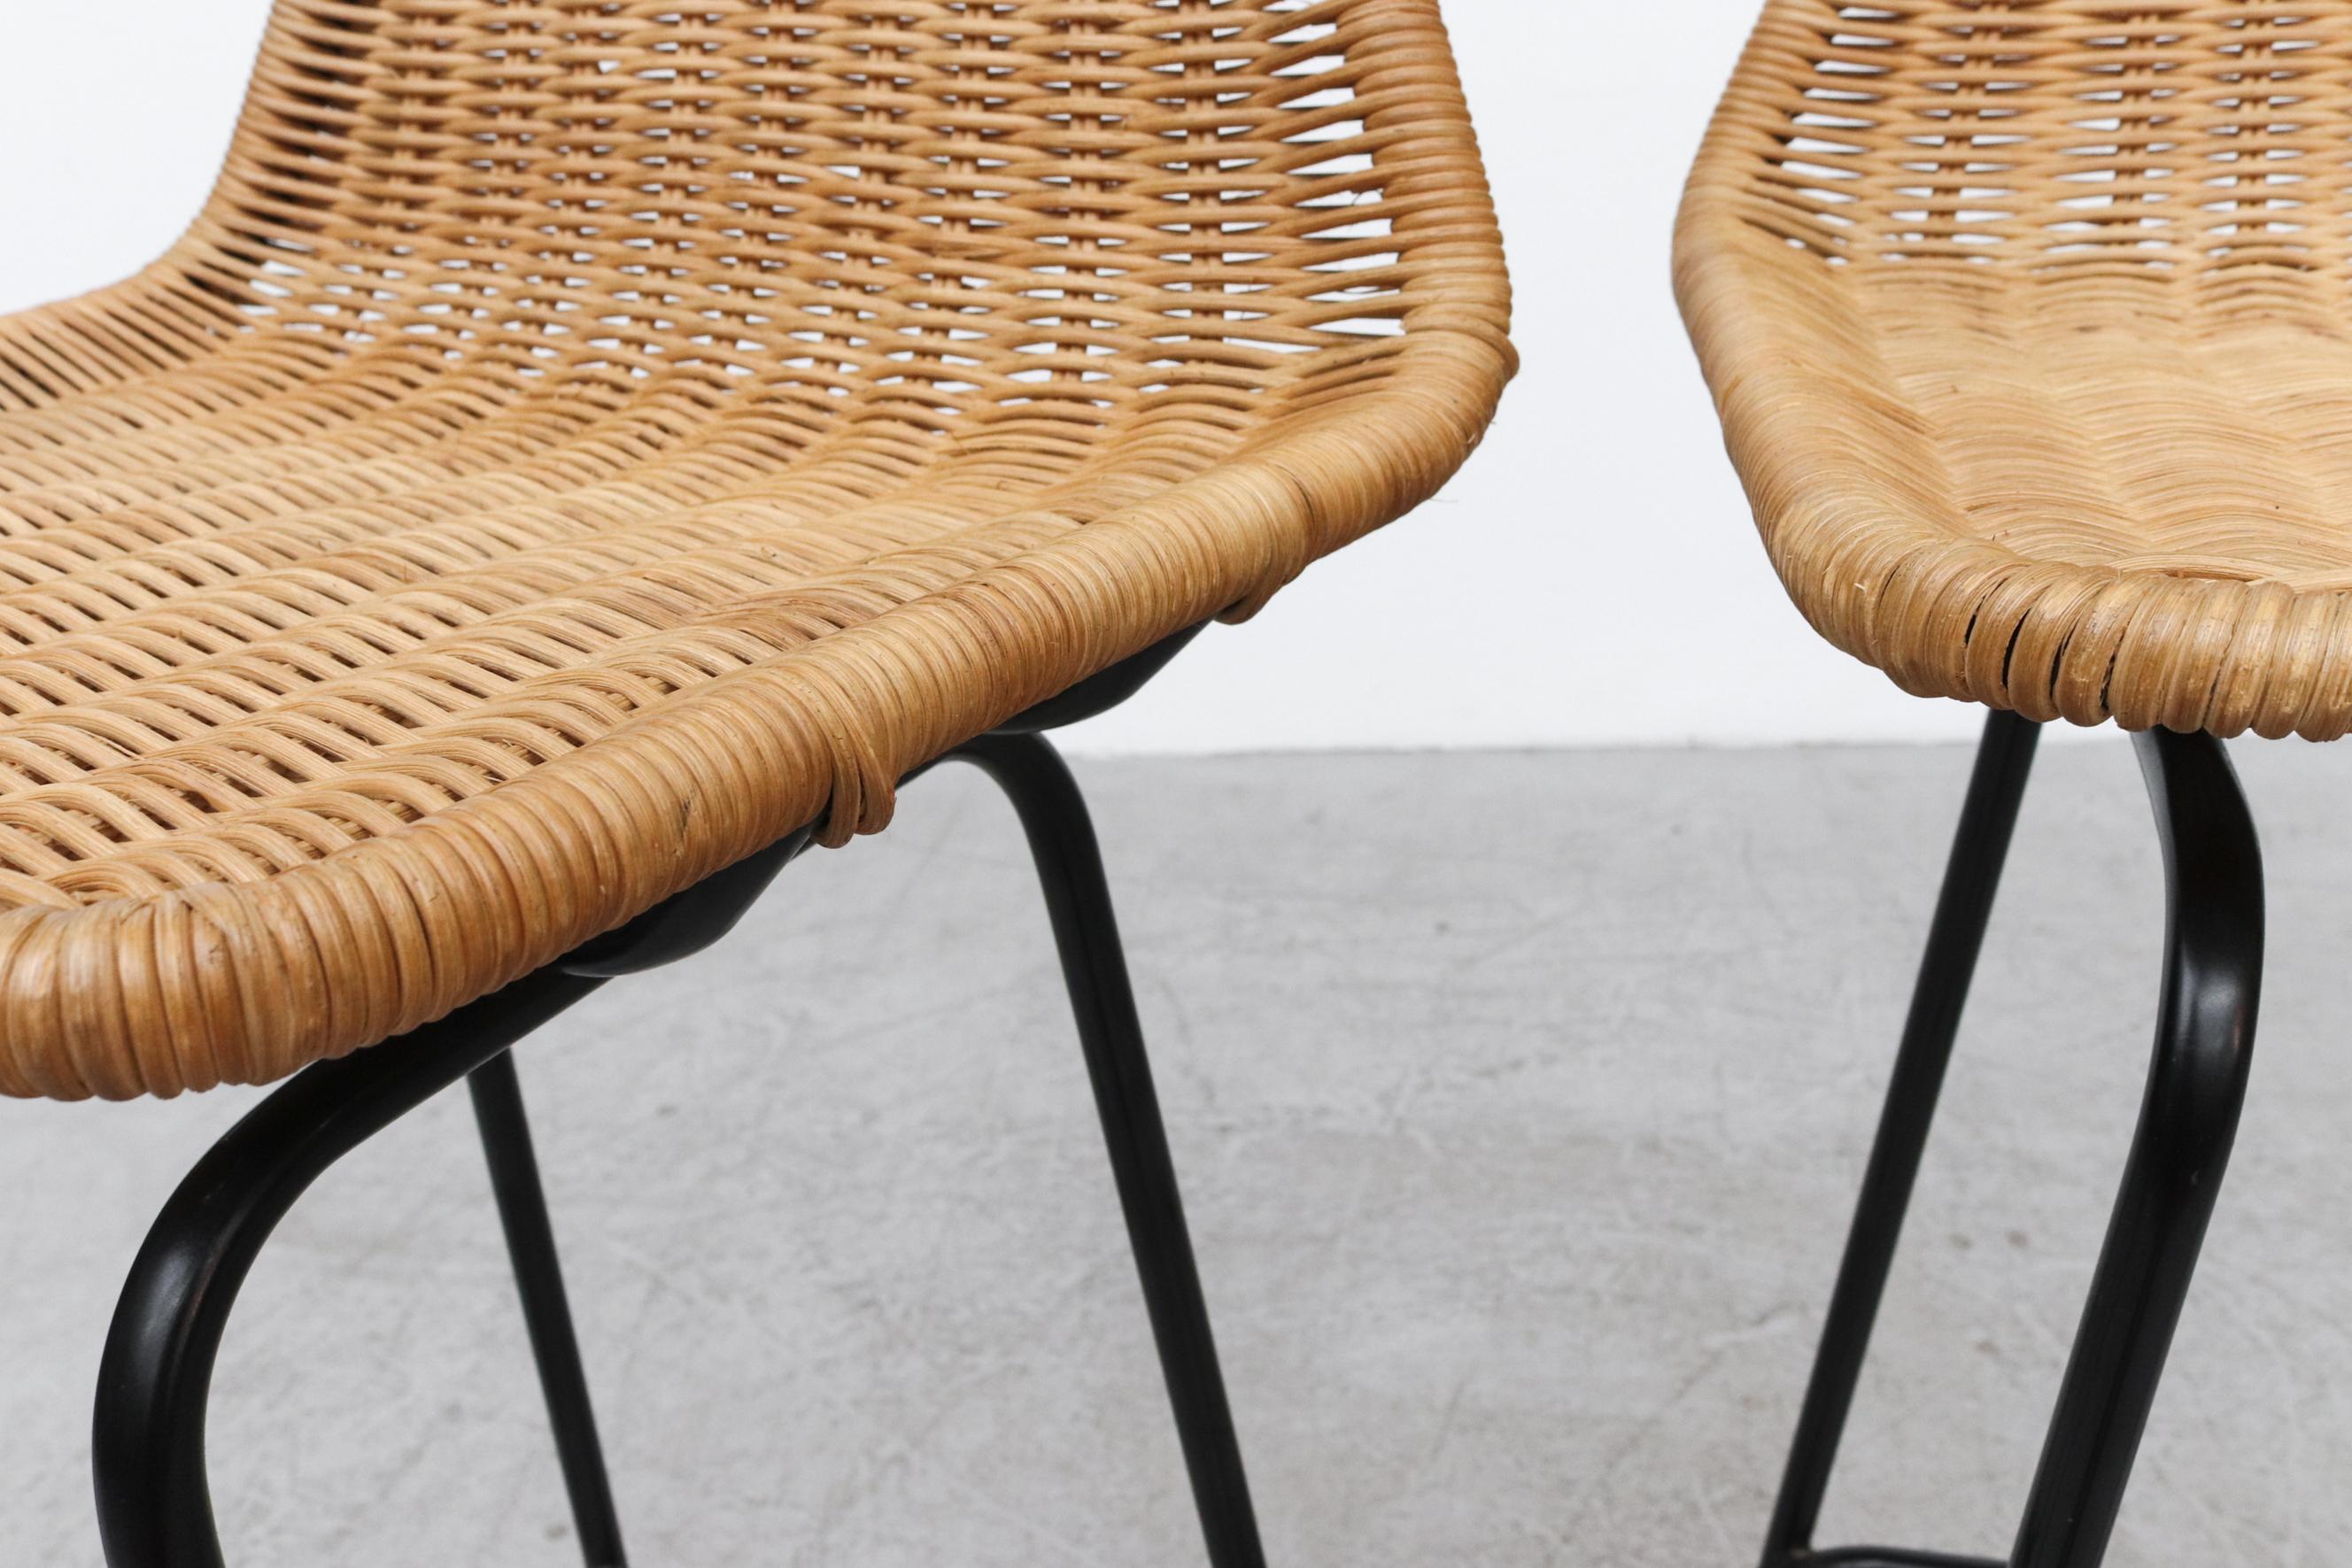 Dutch Charlotte Perriand Style Wicker Stools with Angled Back and Black Legs